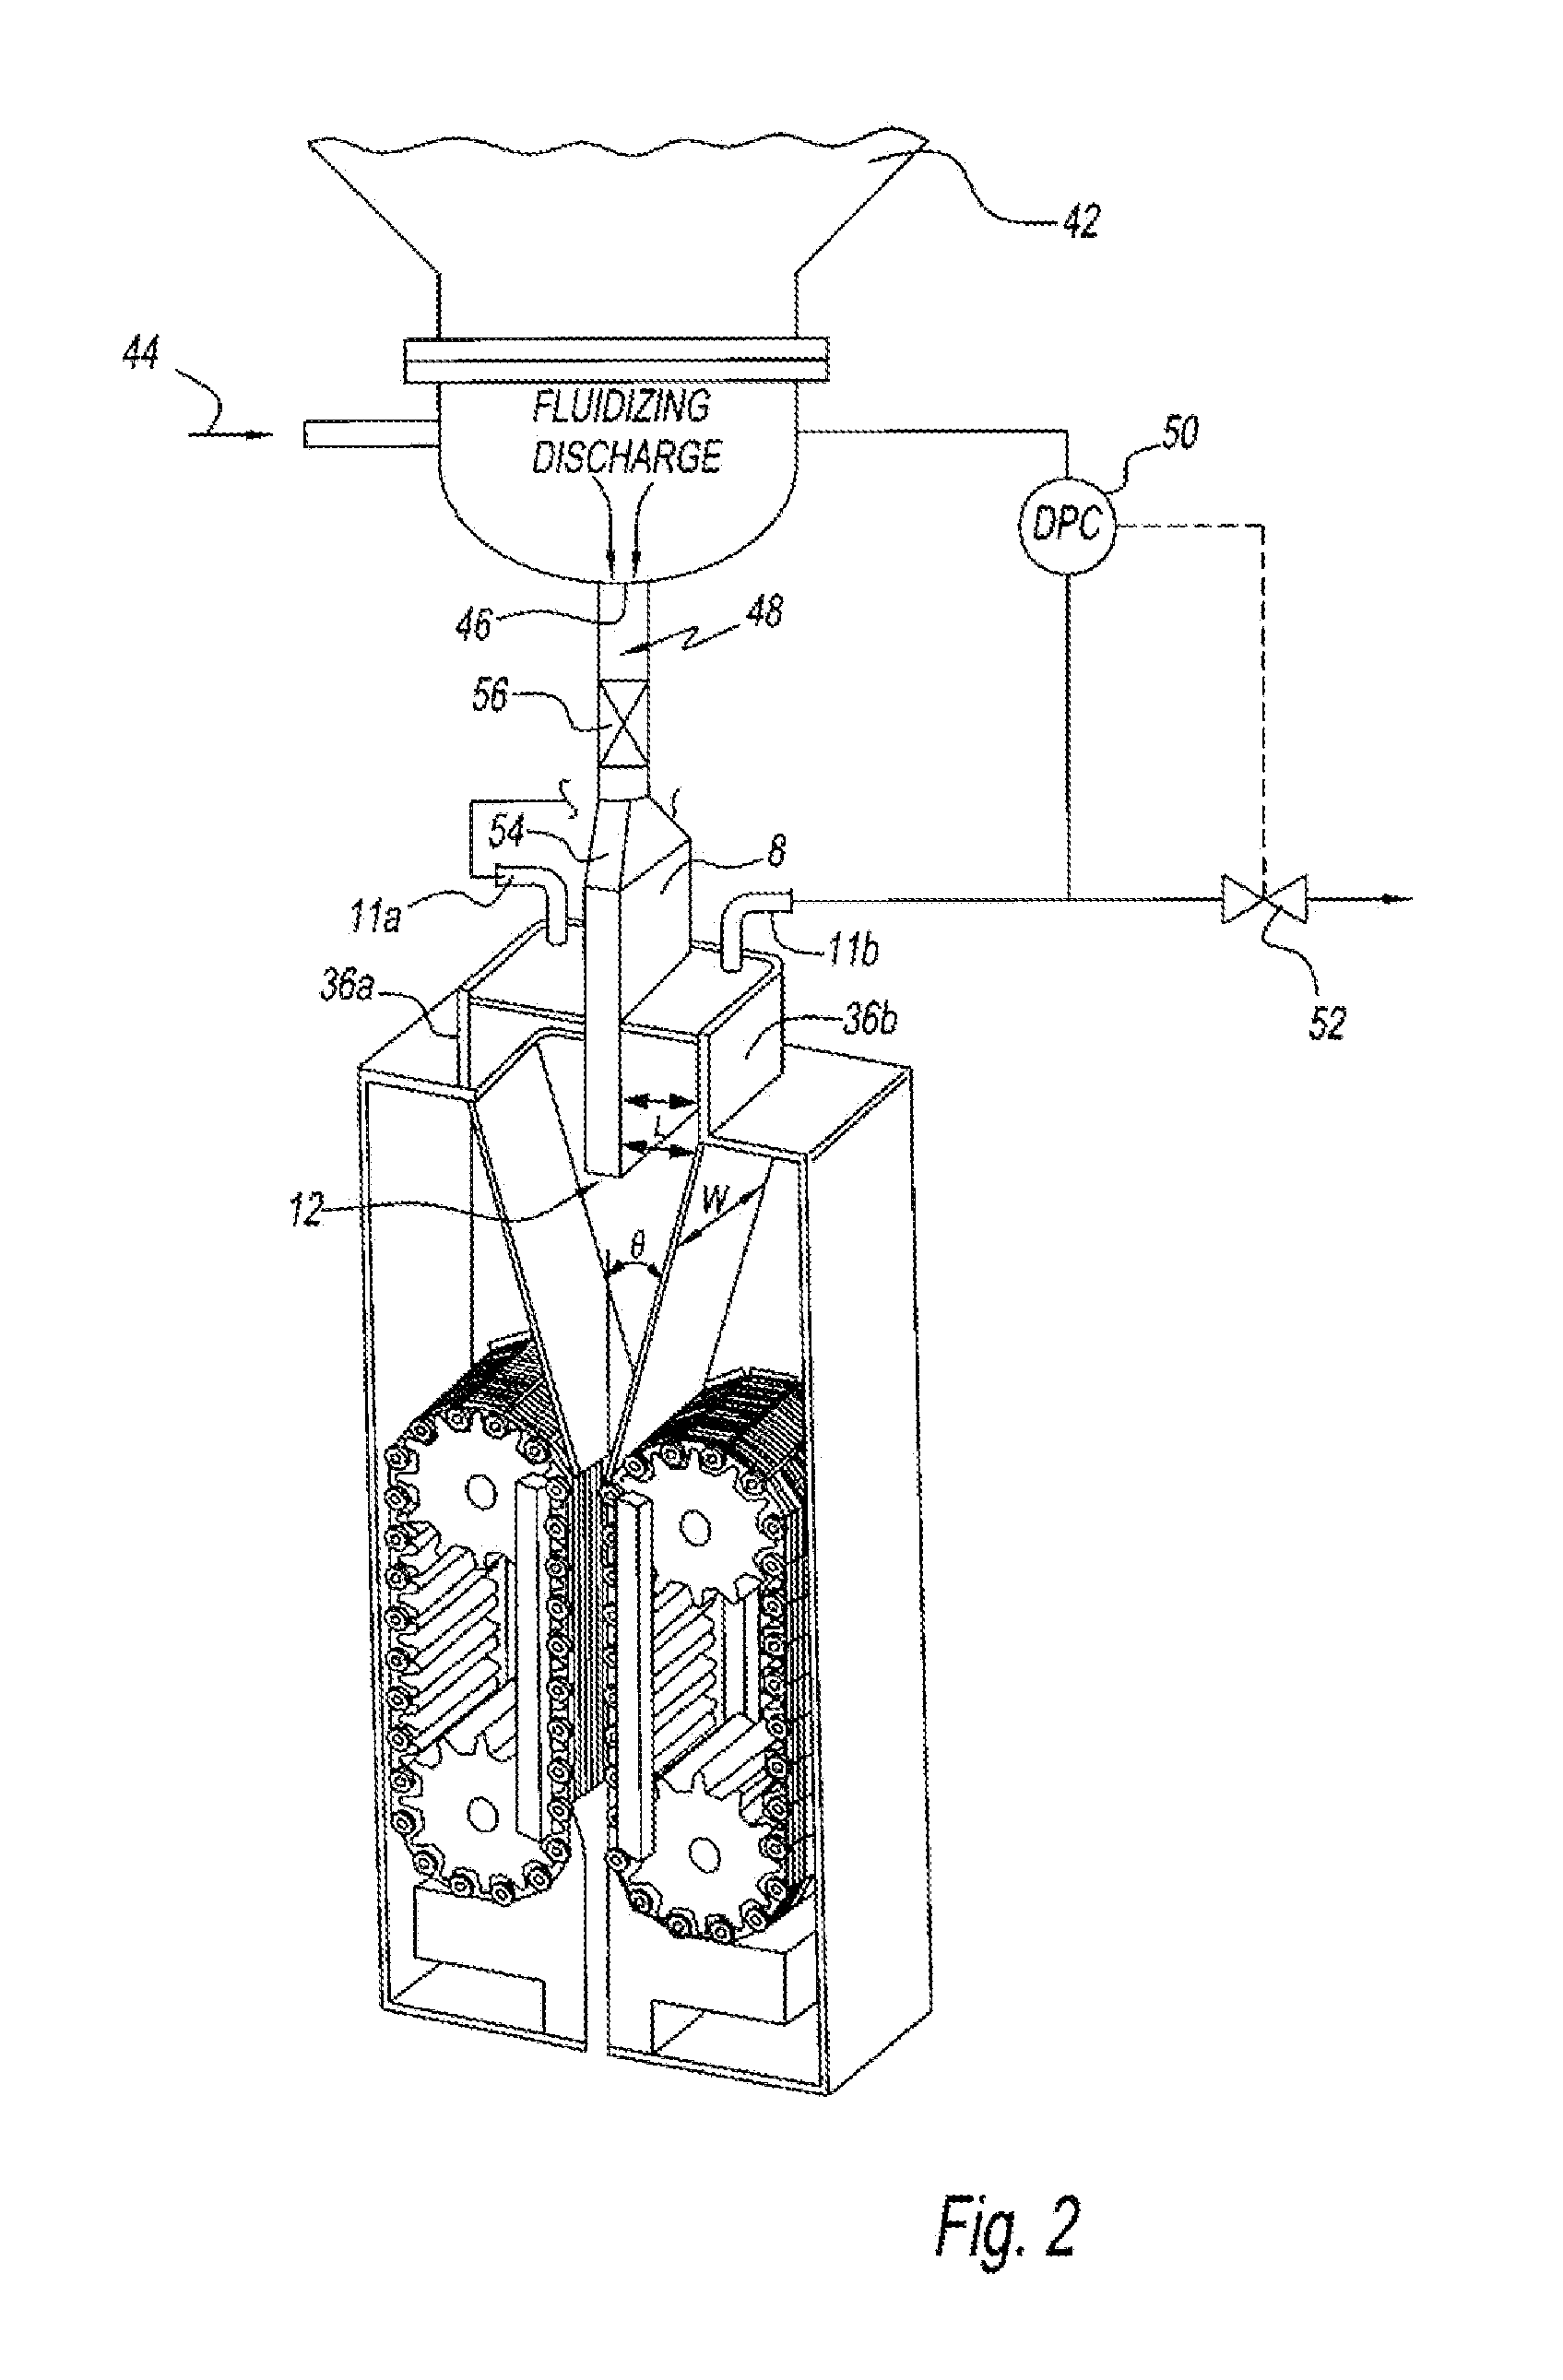 Passive solids supply system and method for supplying solids